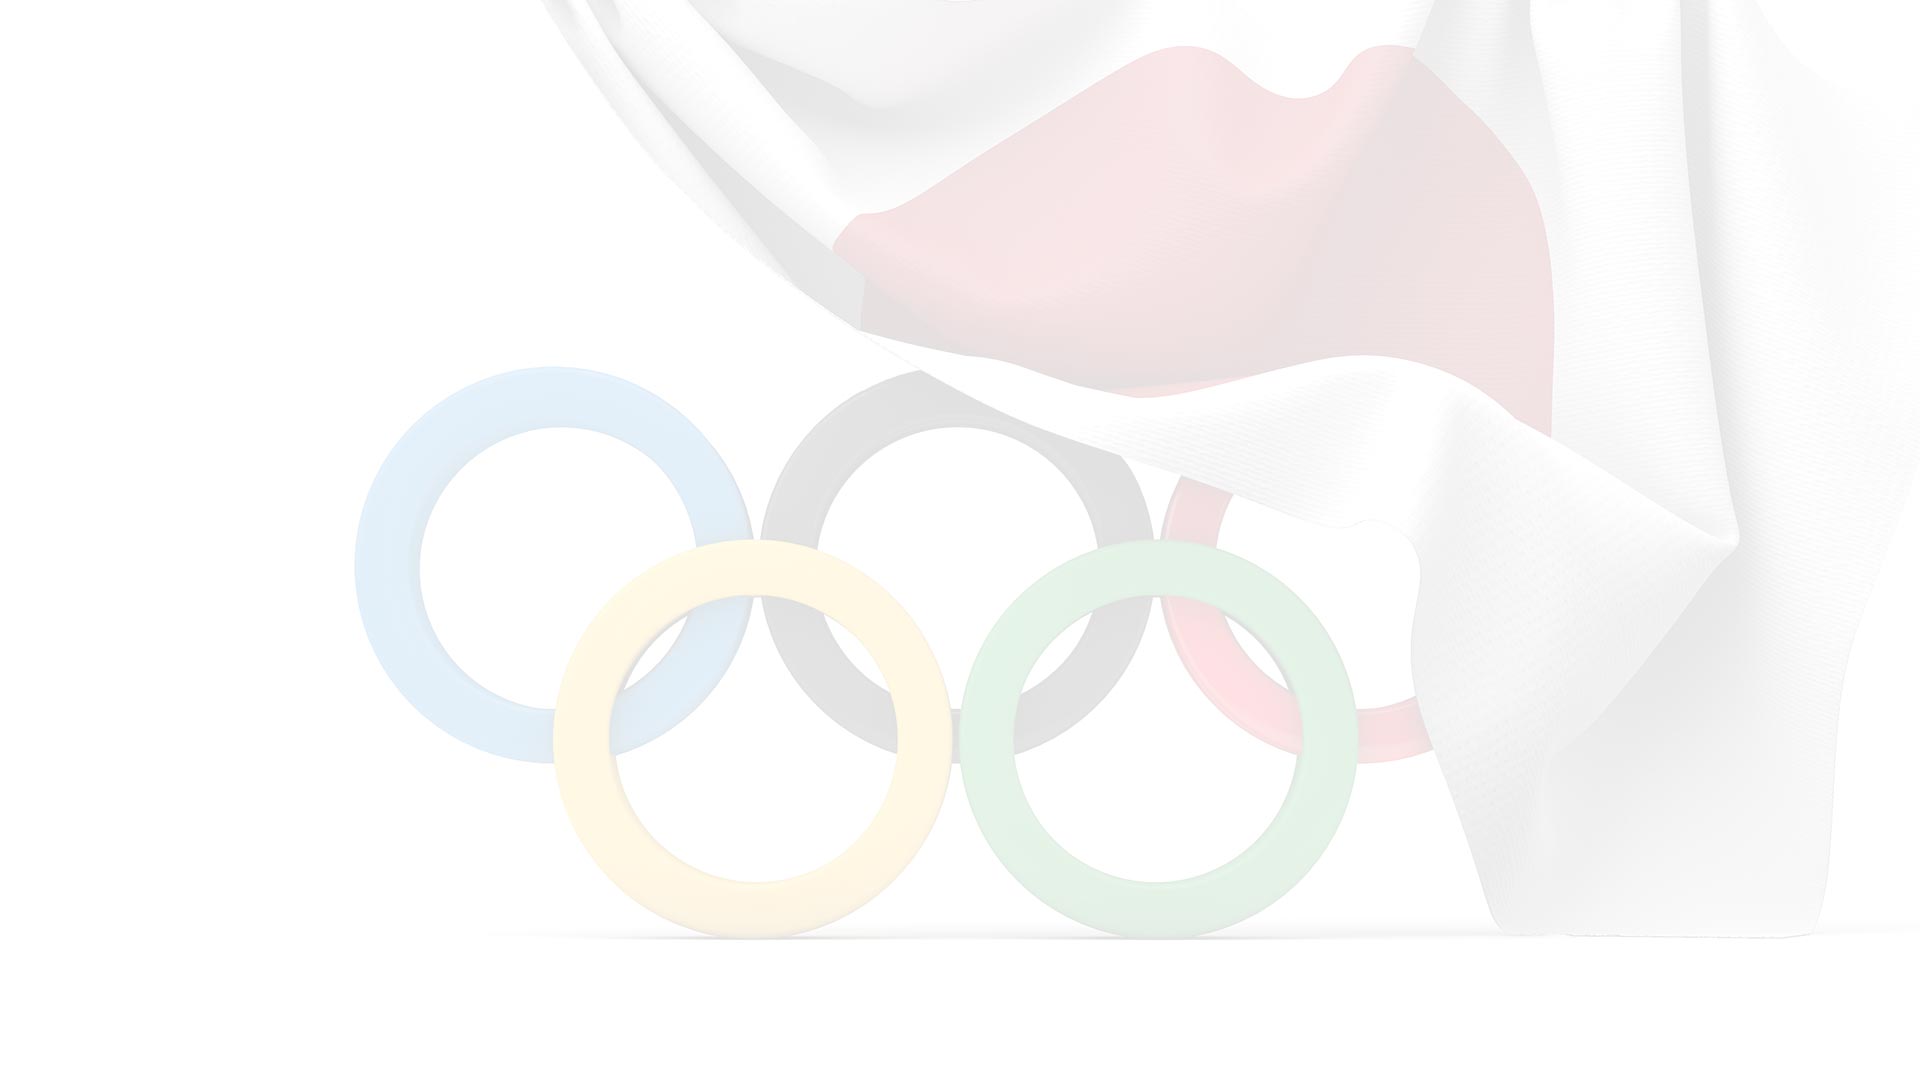 image of olympic rings and flags